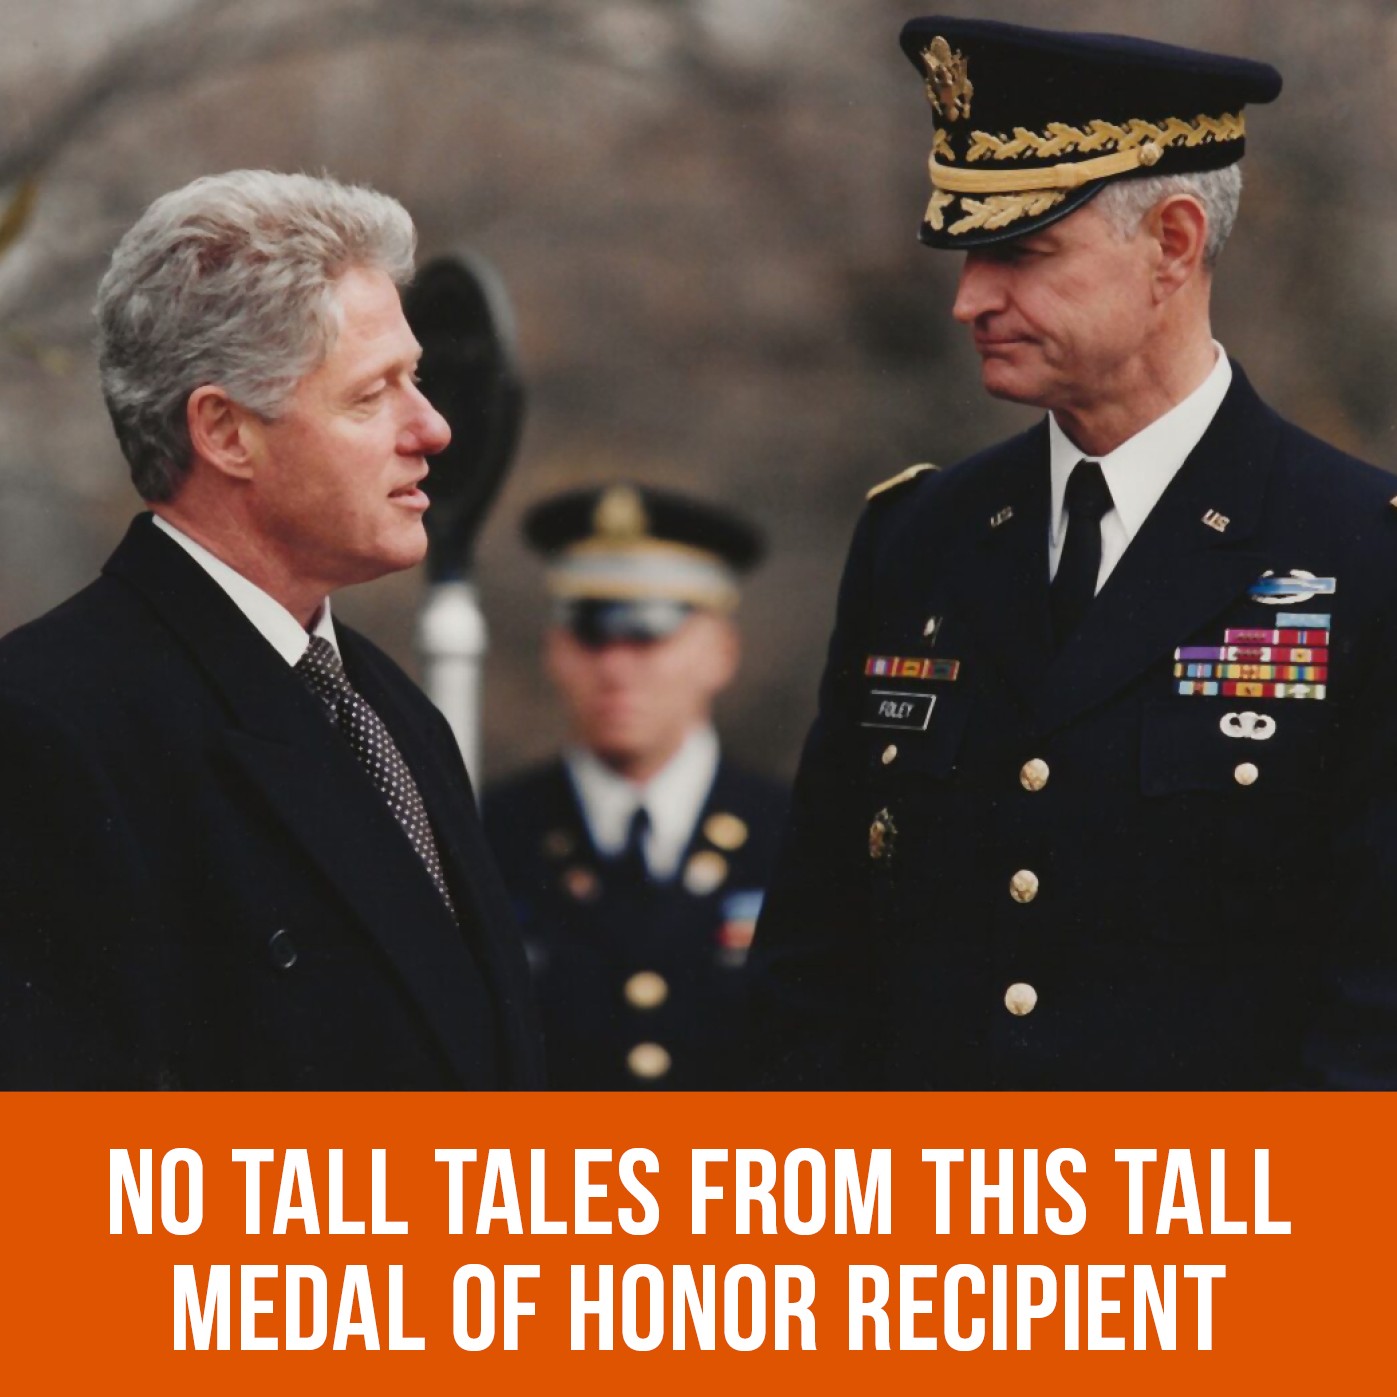 No Tall Tales from this Tall Medal of Honor Recipient